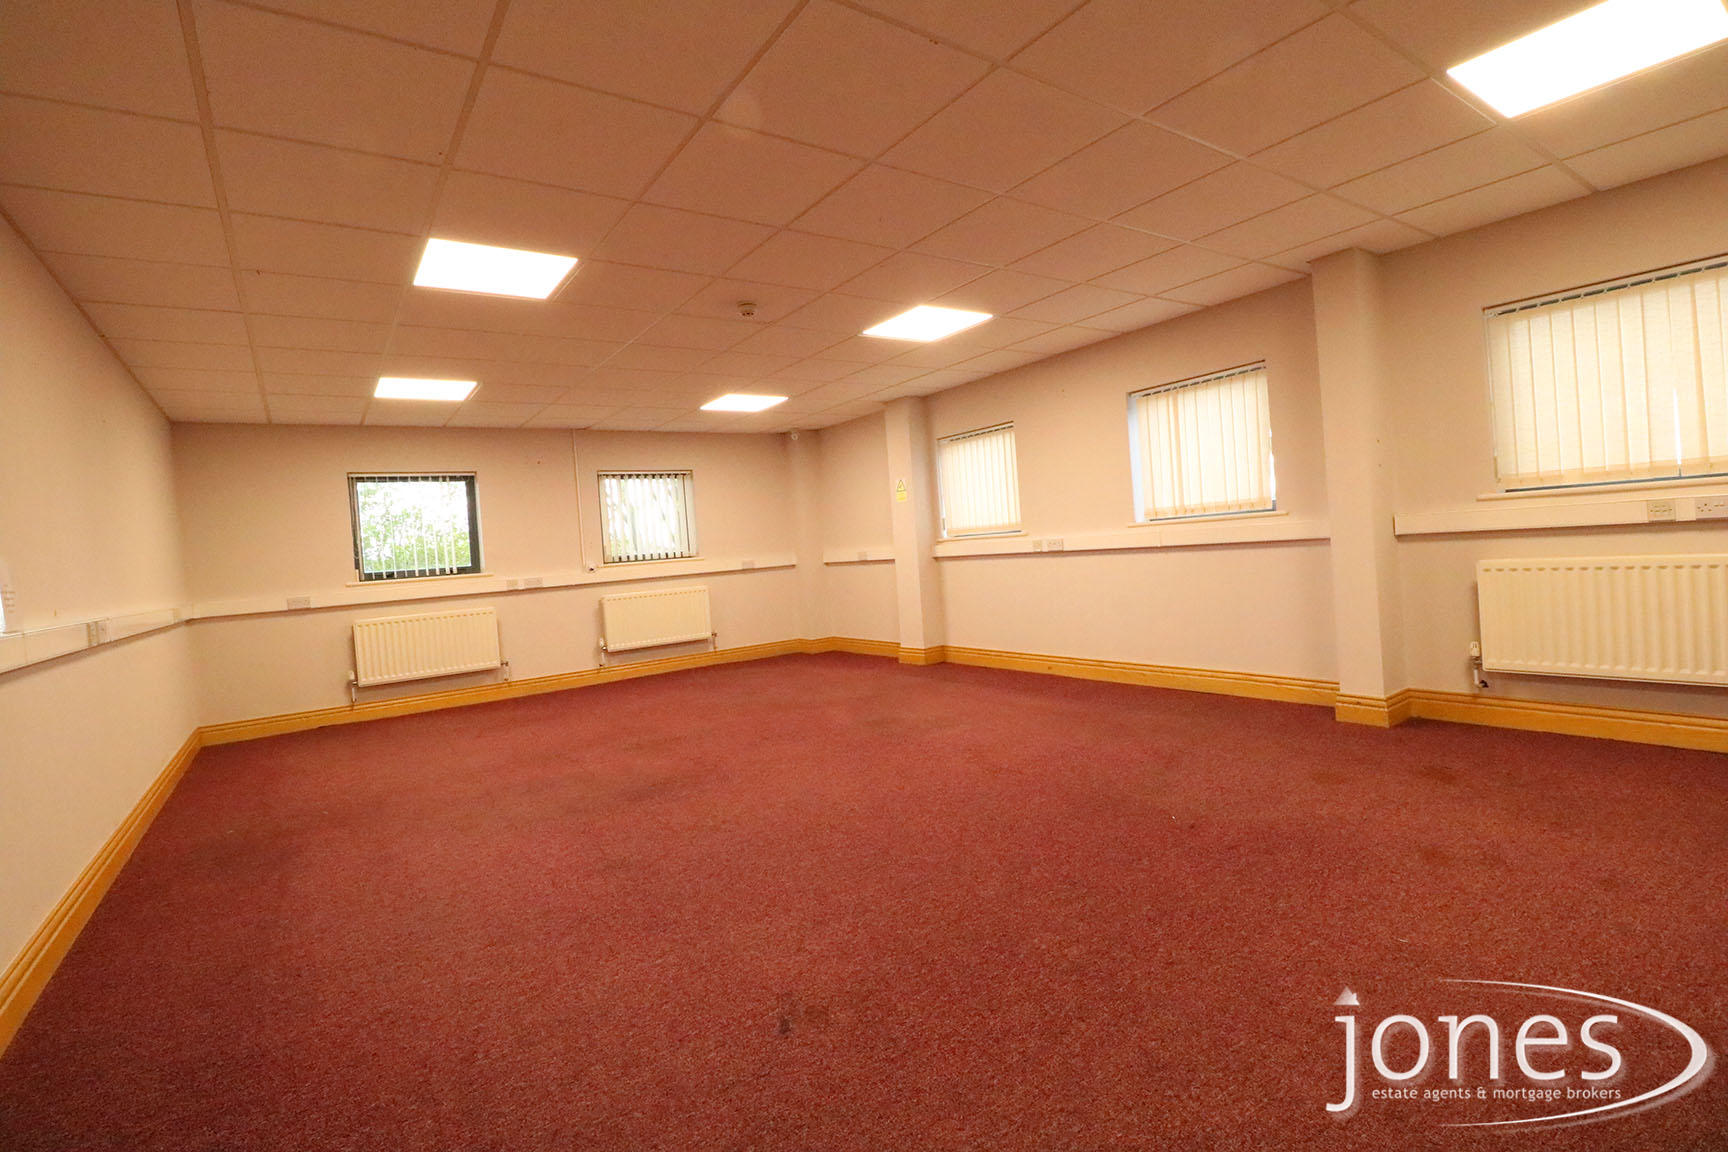 Home for Sale Let - Photo 07 Durham Tees Valley Business Centre Orde Wingate Way Primrose Hill Industrial Estate Stockton on Tees TS19 0GD